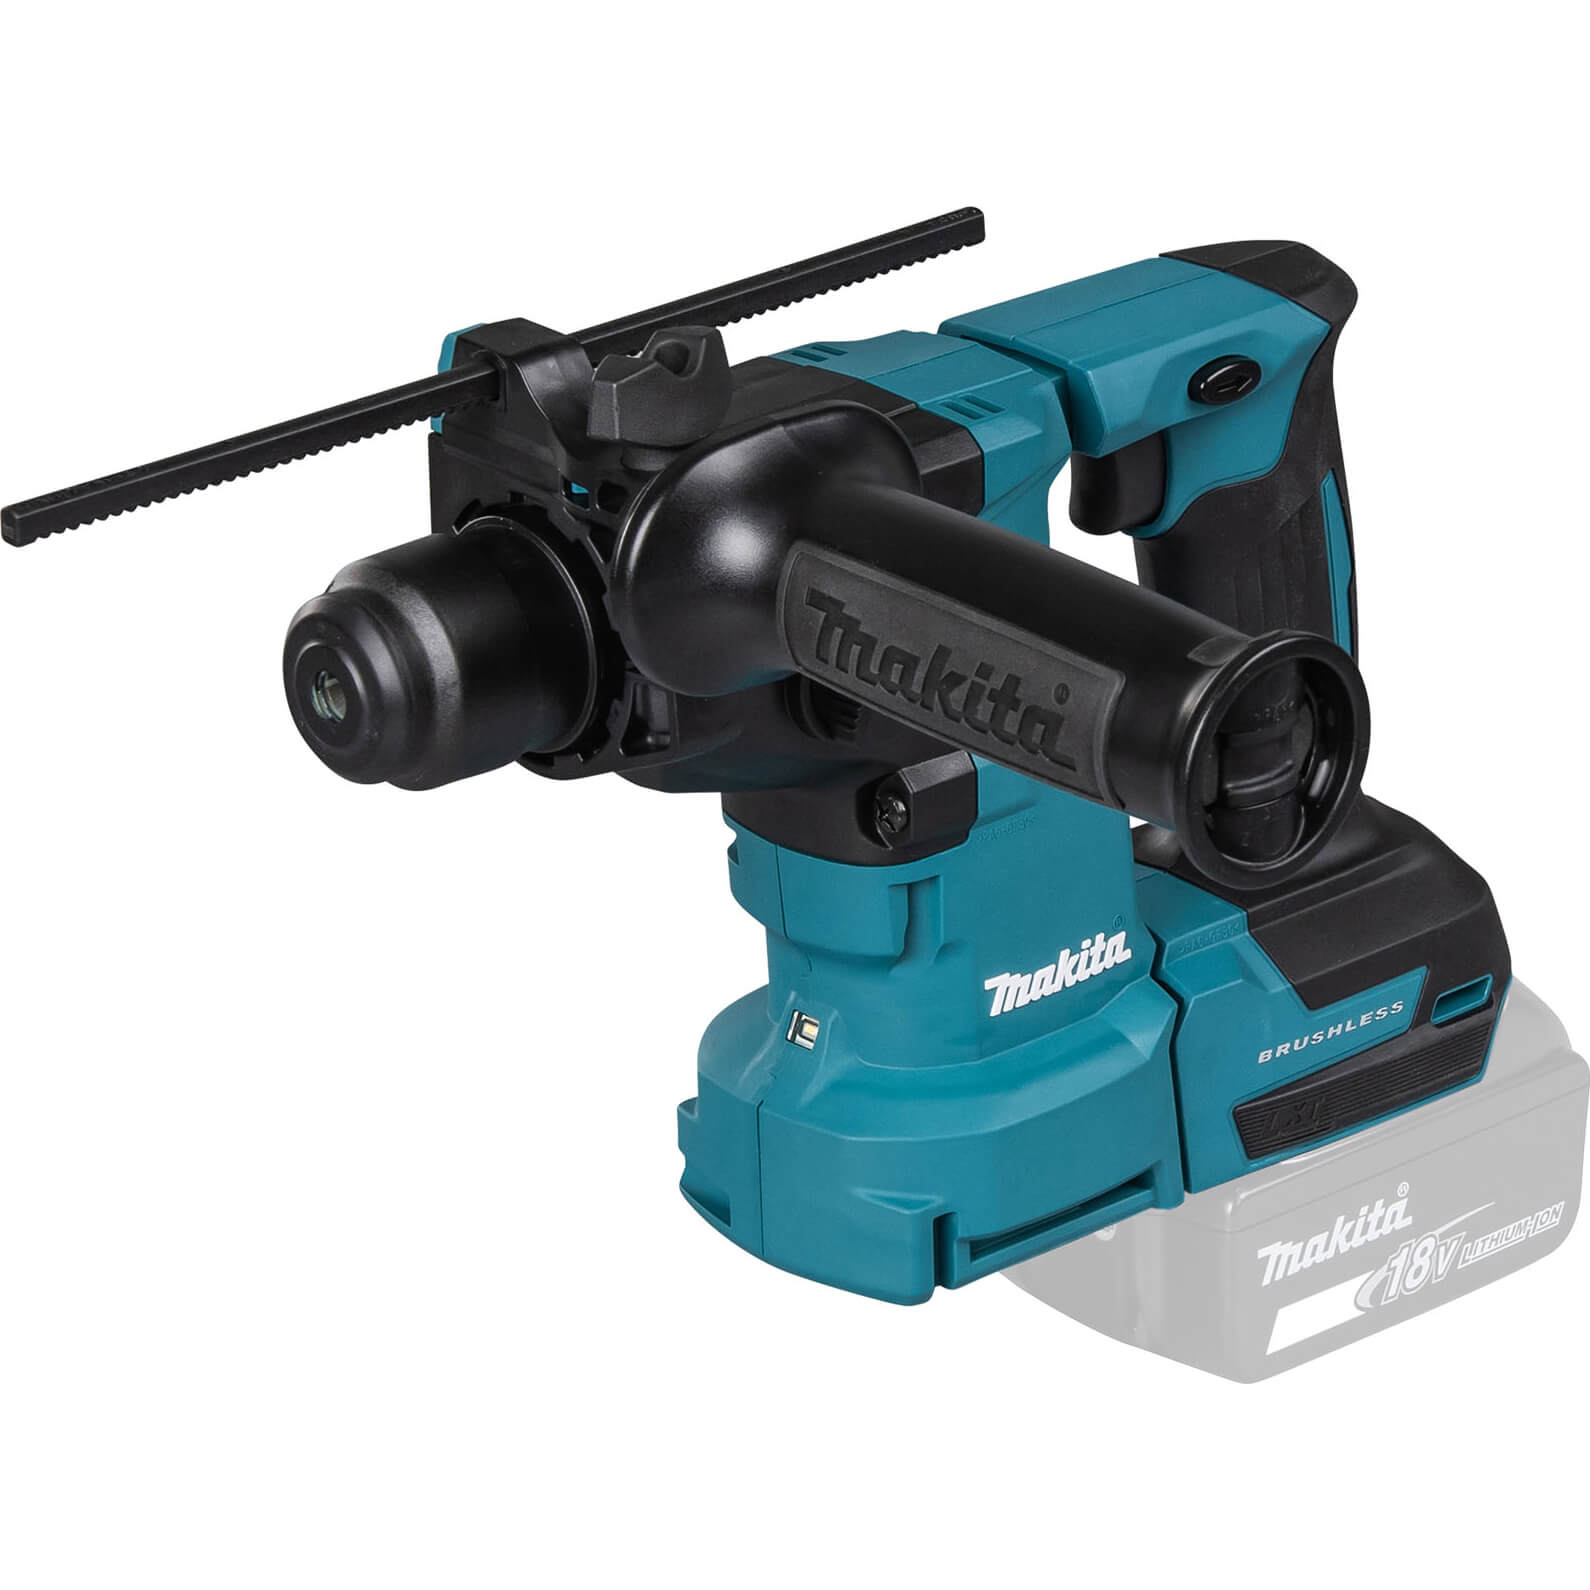 Image of Makita DHR183 18v LXT Cordless Brushless SDS Plus Rotary Hammer Drill No Batteries No Charger No Case